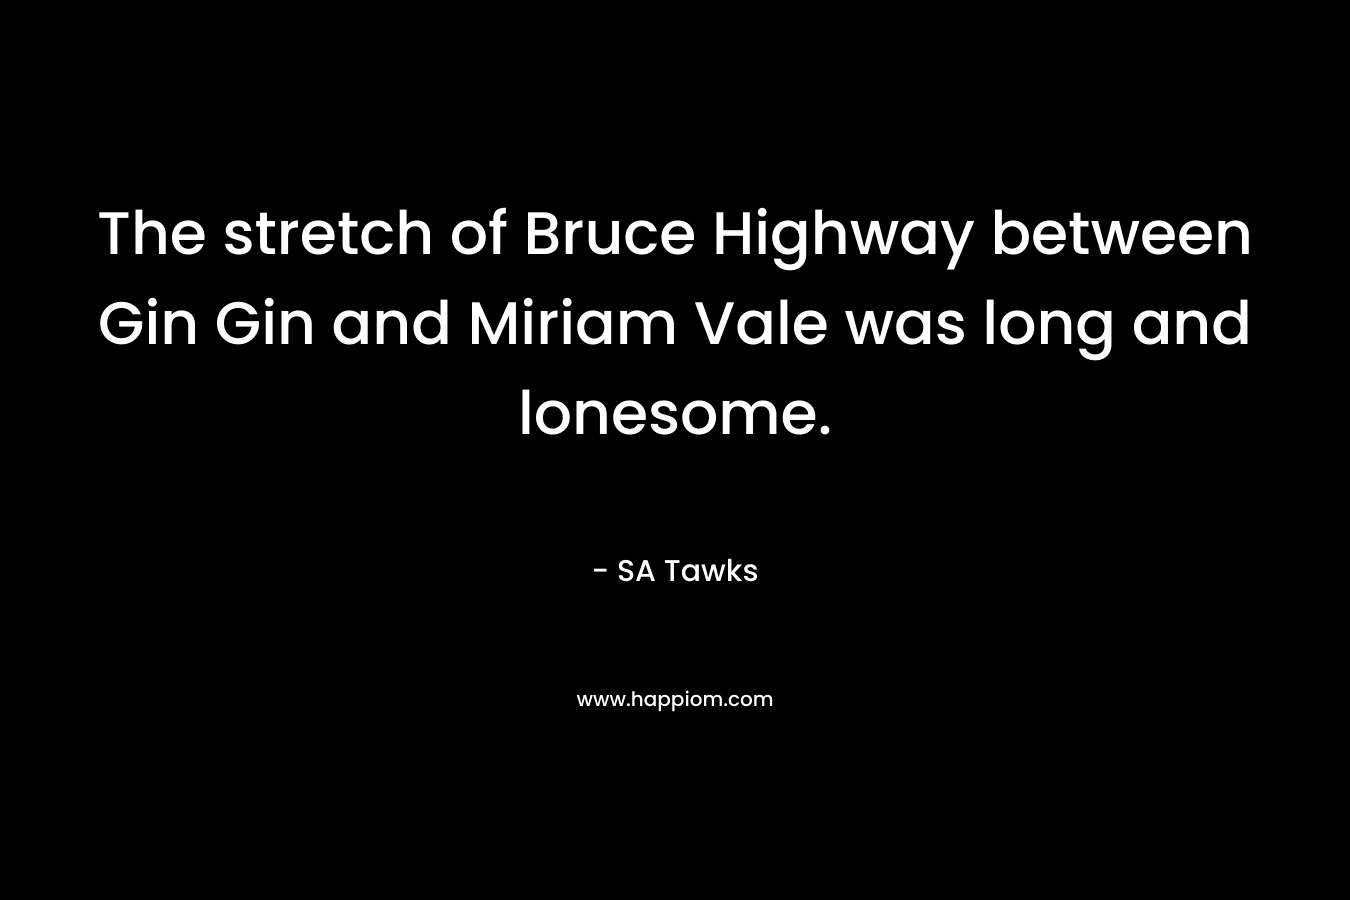 The stretch of Bruce Highway between Gin Gin and Miriam Vale was long and lonesome. – SA Tawks